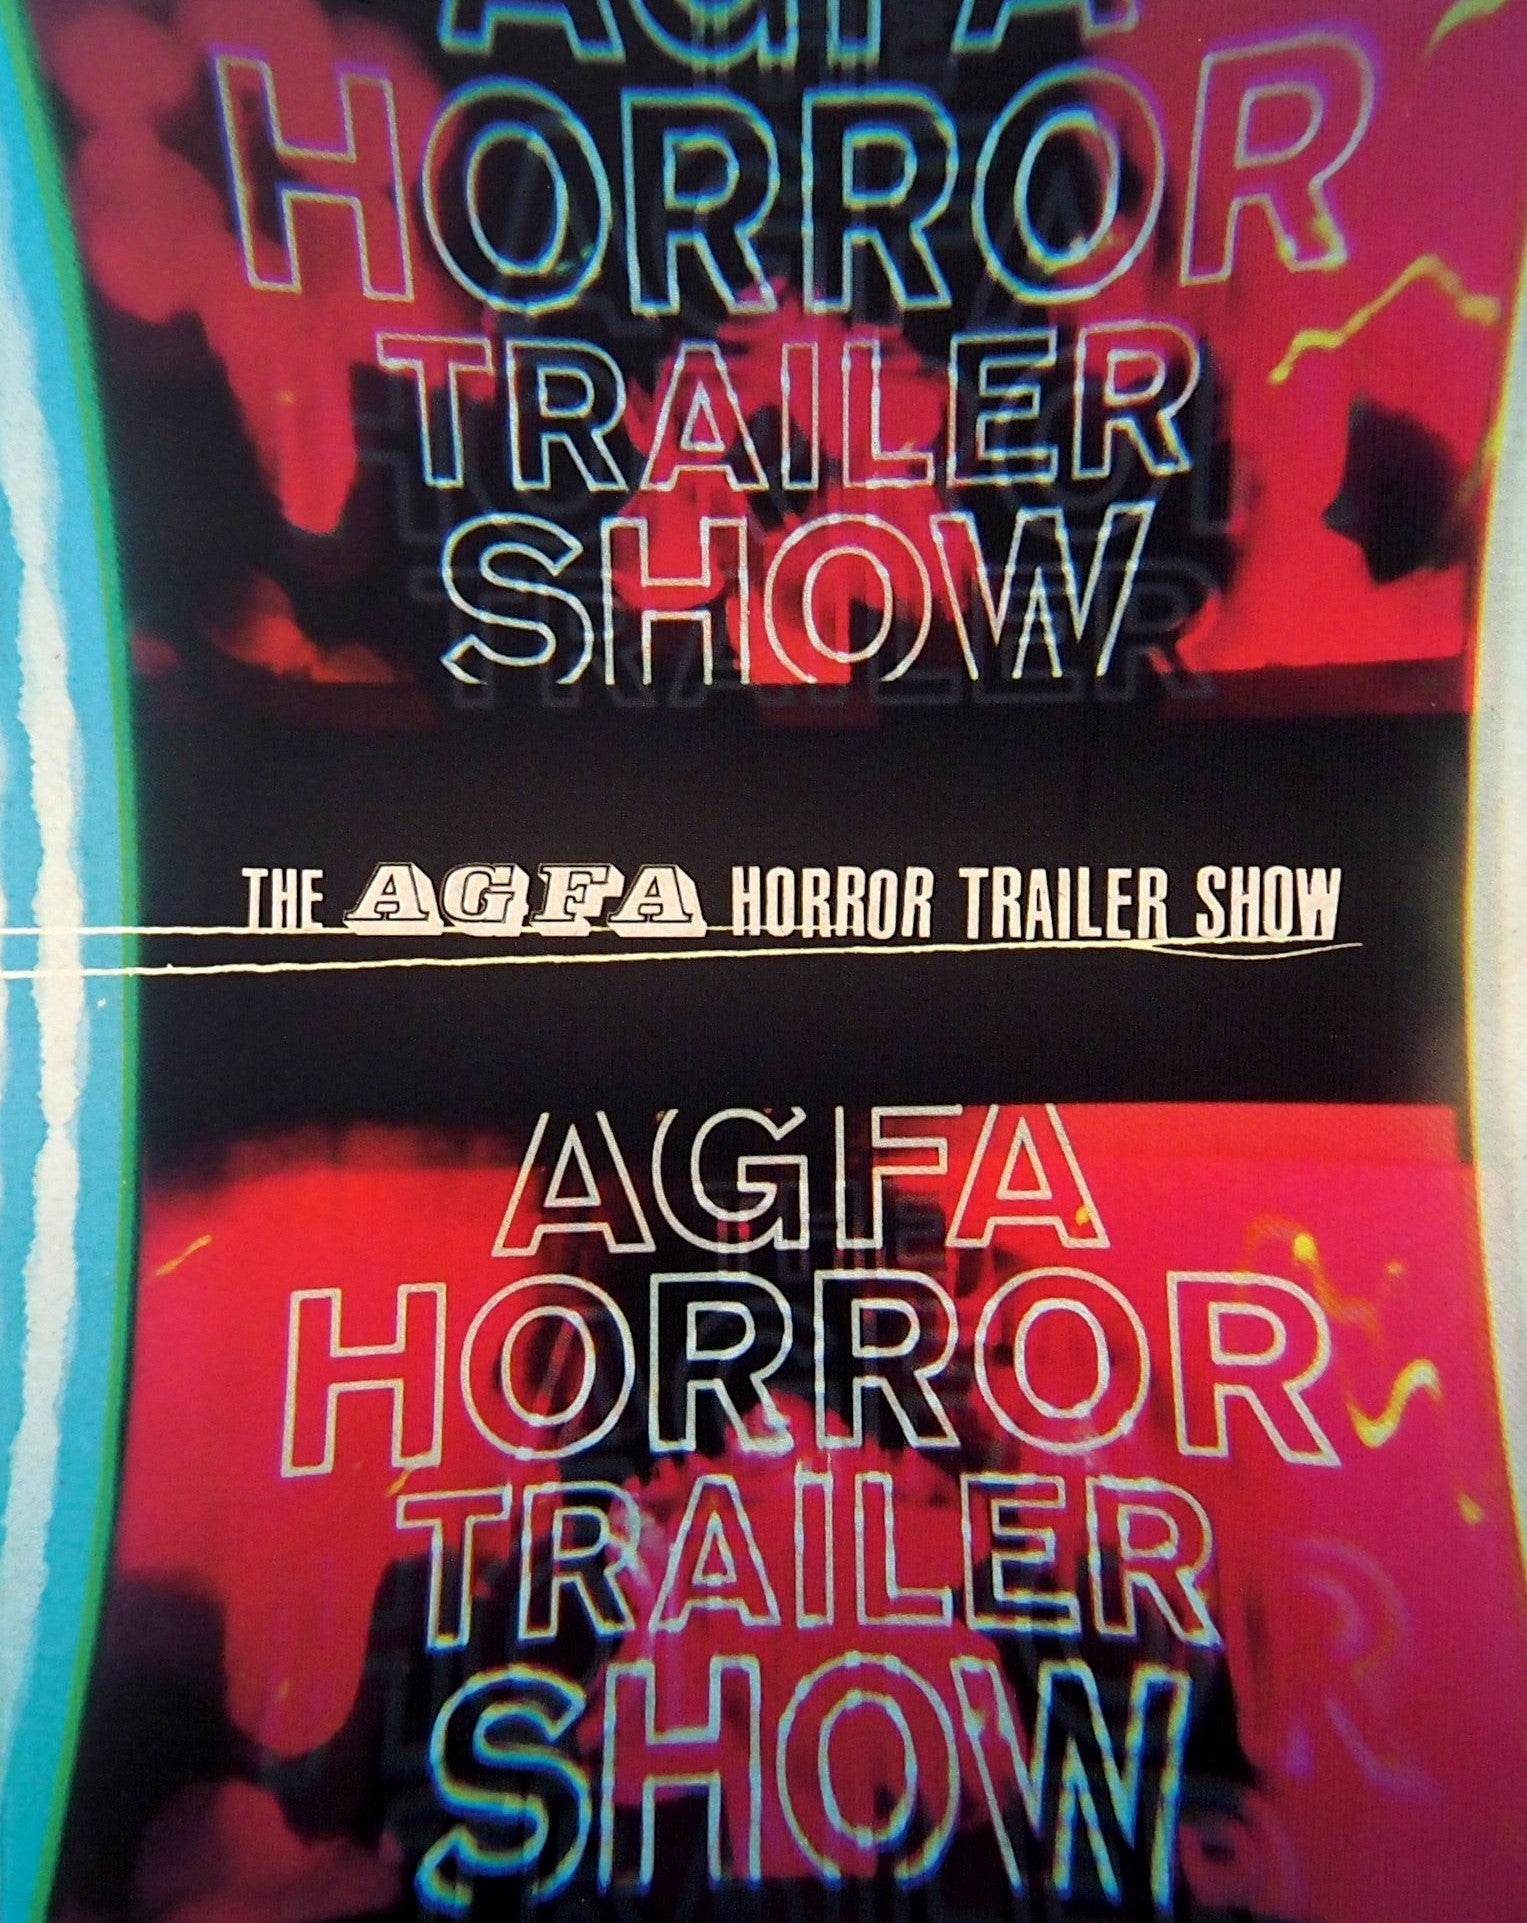 The Agfa Horror Trailer Show (Limited Edition) Blu-Ray Blu-Ray